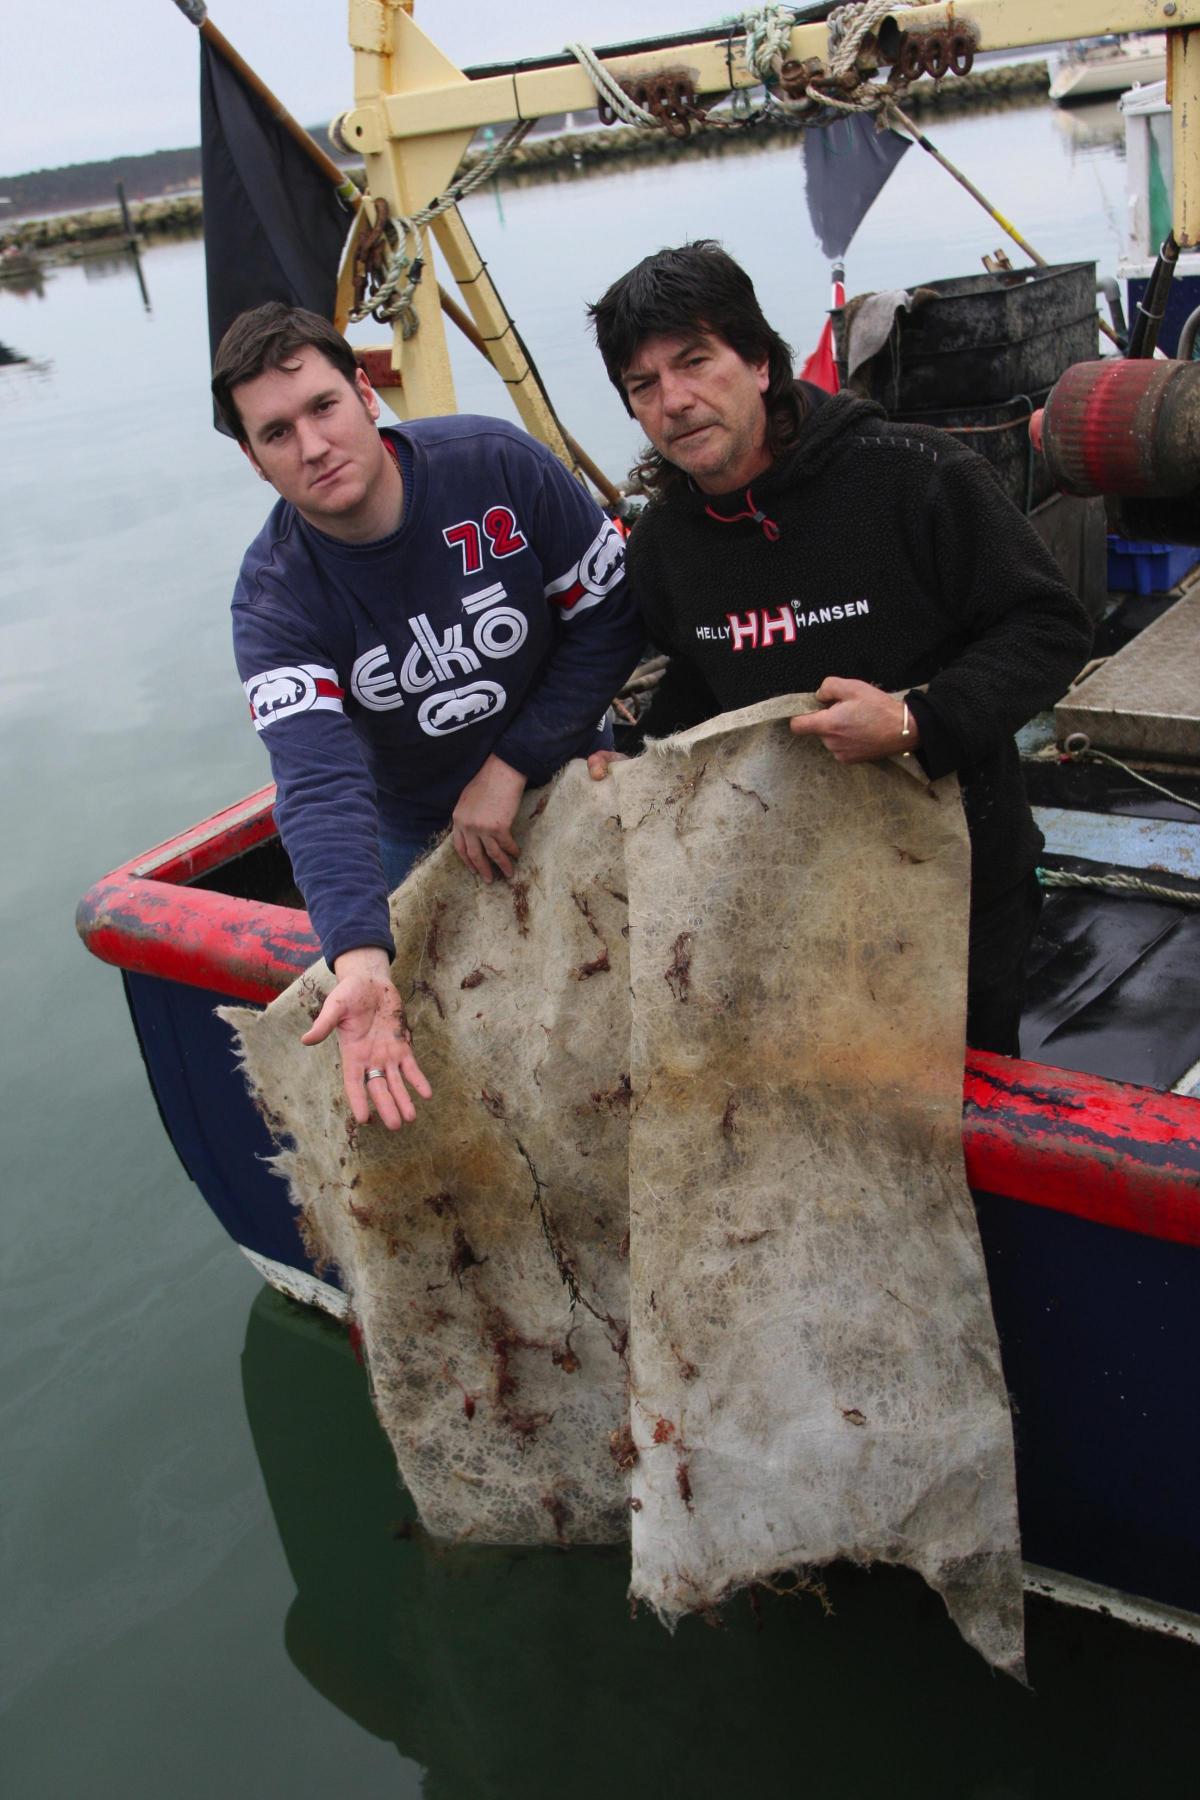 Poole fishermen Matthew Ellison and Mark Goulding with pieces of textile bagswhich got caught in the propellers of their boat in 2010